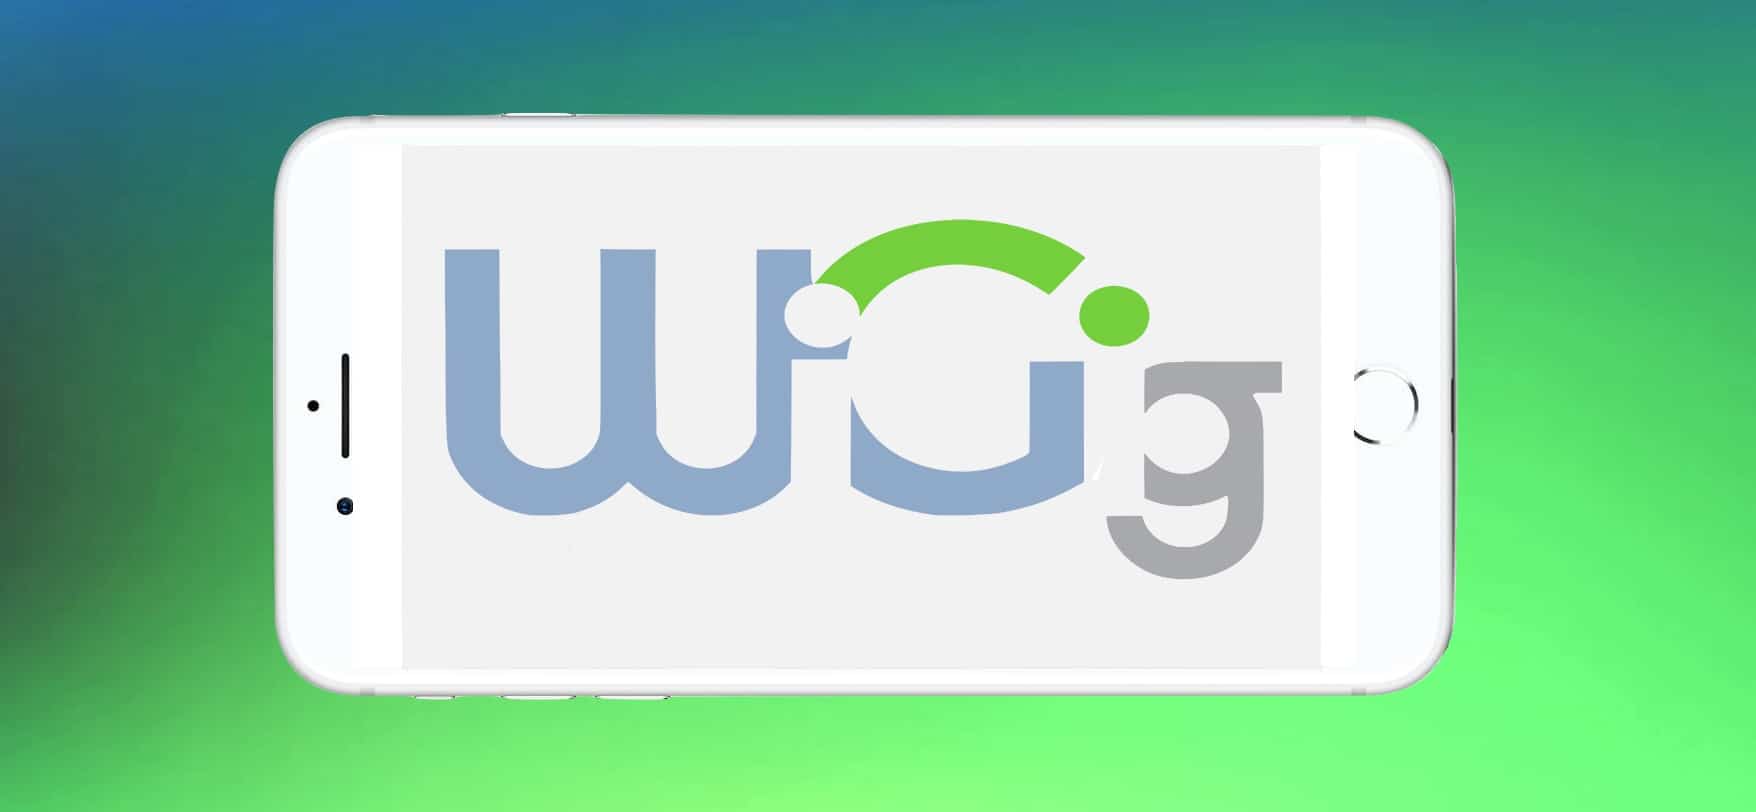 A WiGig iPhone might happen in 2020.